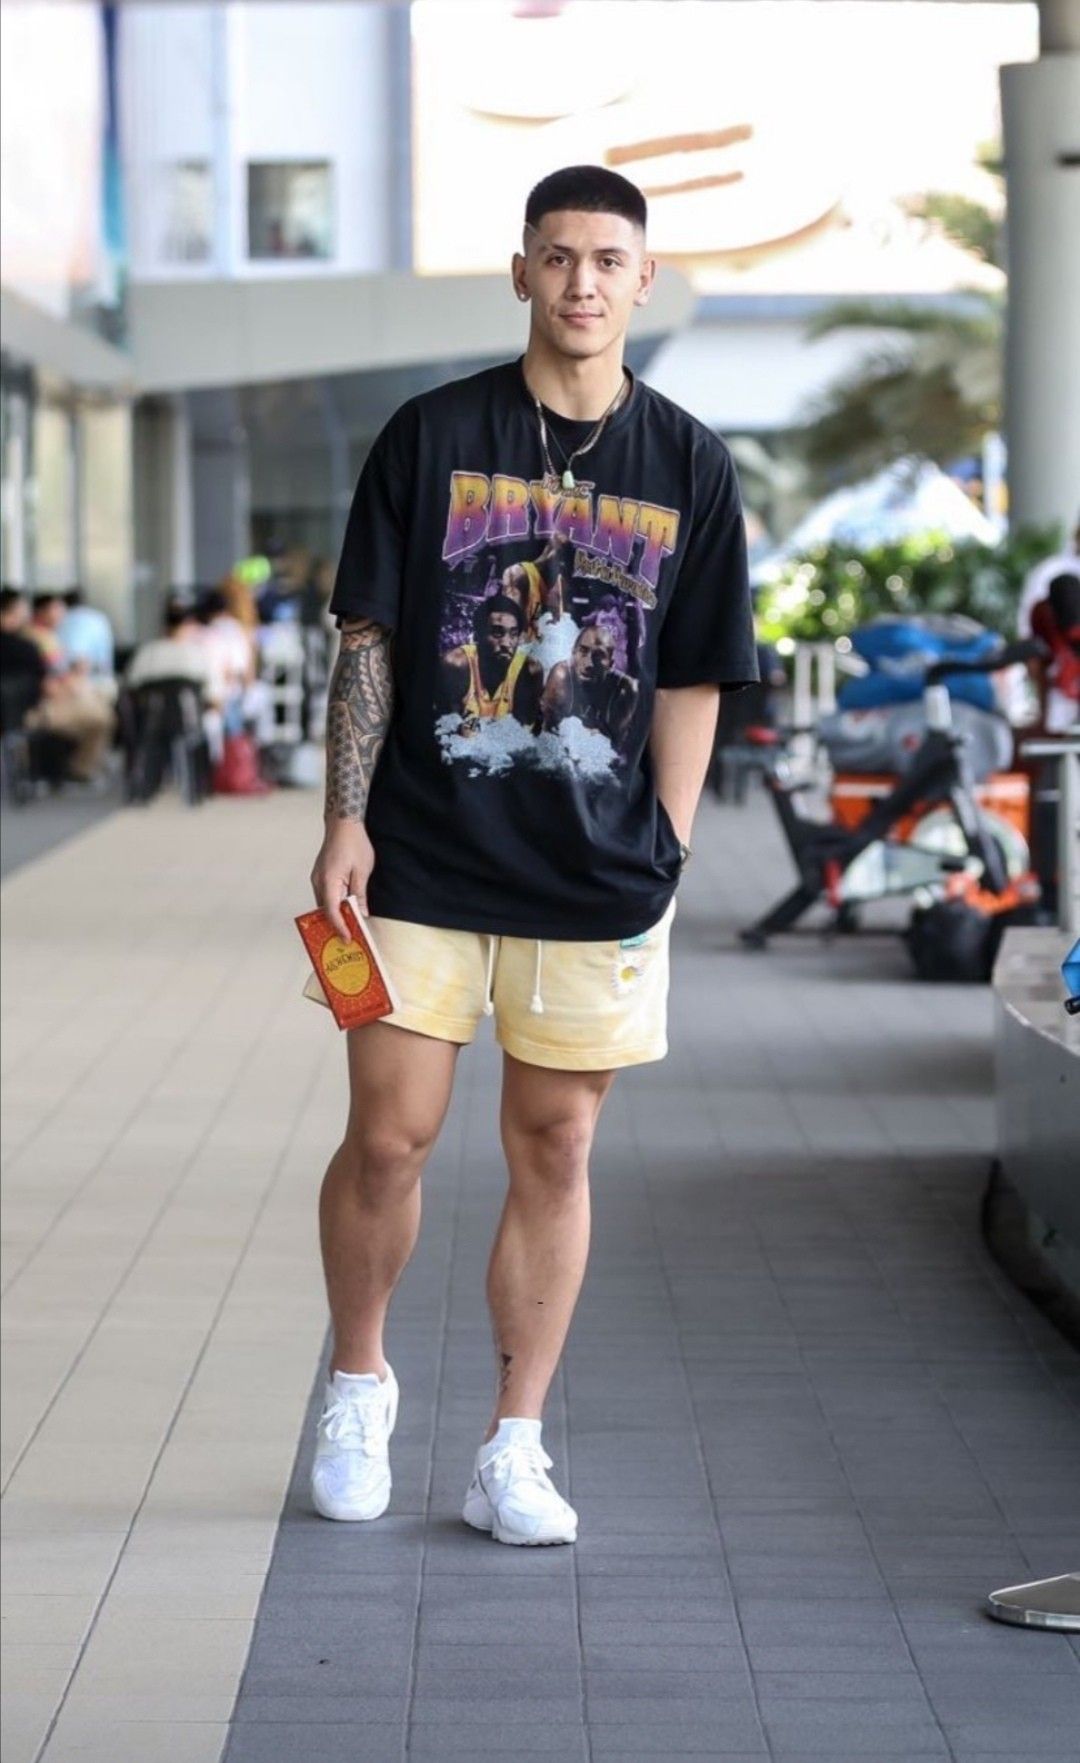 Casual Men's Summer 2023 Outfits: Street Style Inspiration for Chic and Stylish Looks